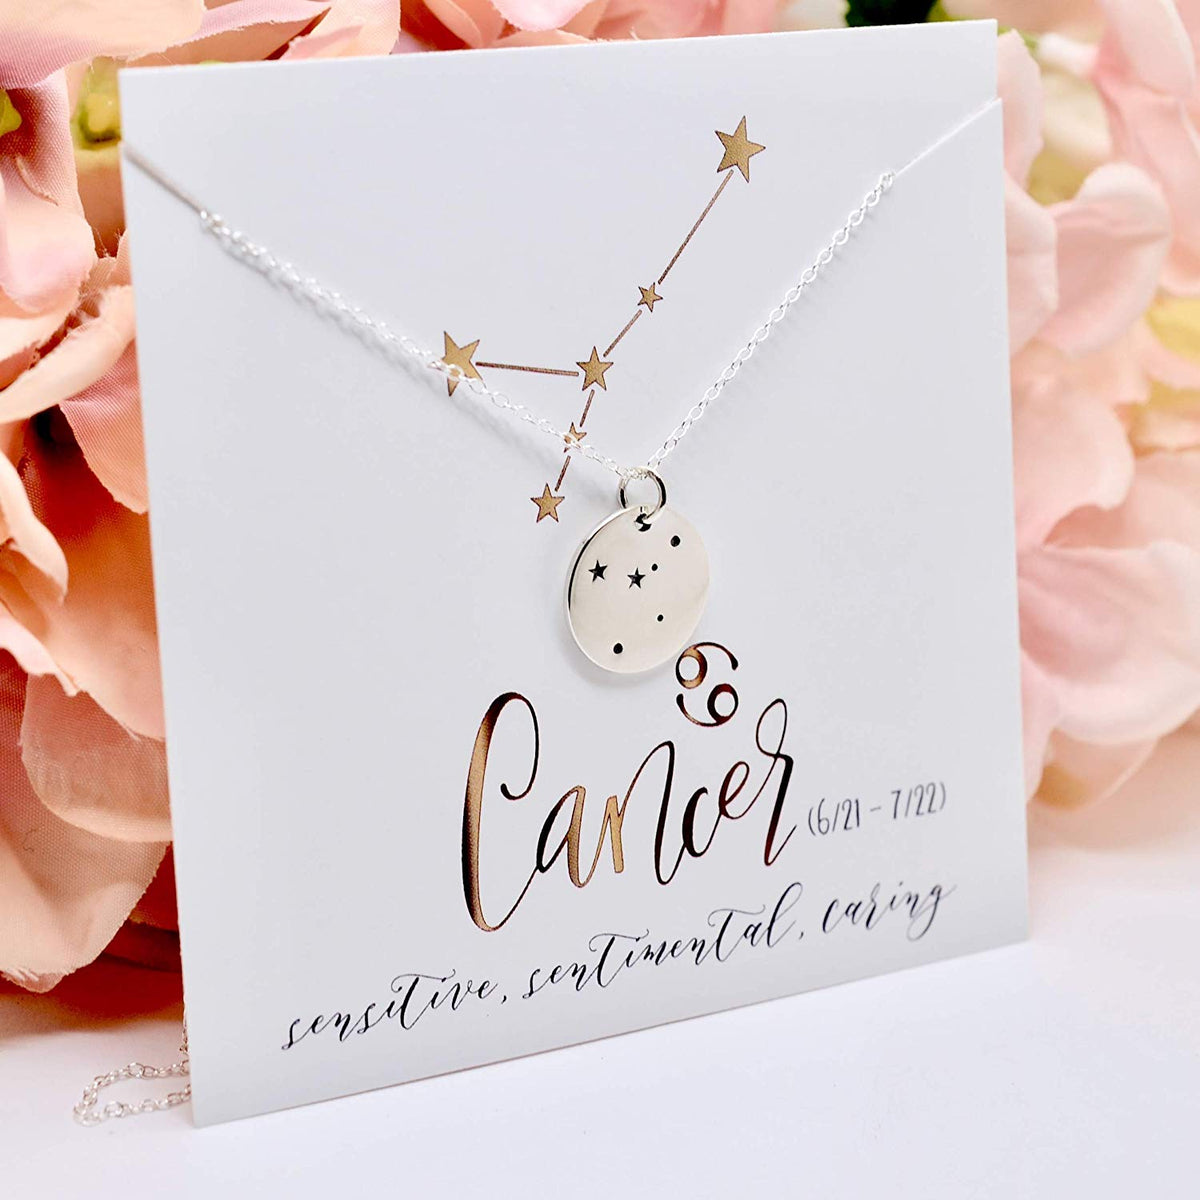 Cancer Zodiac Sign Sterling Silver Constellation Necklace - Love It Personalized